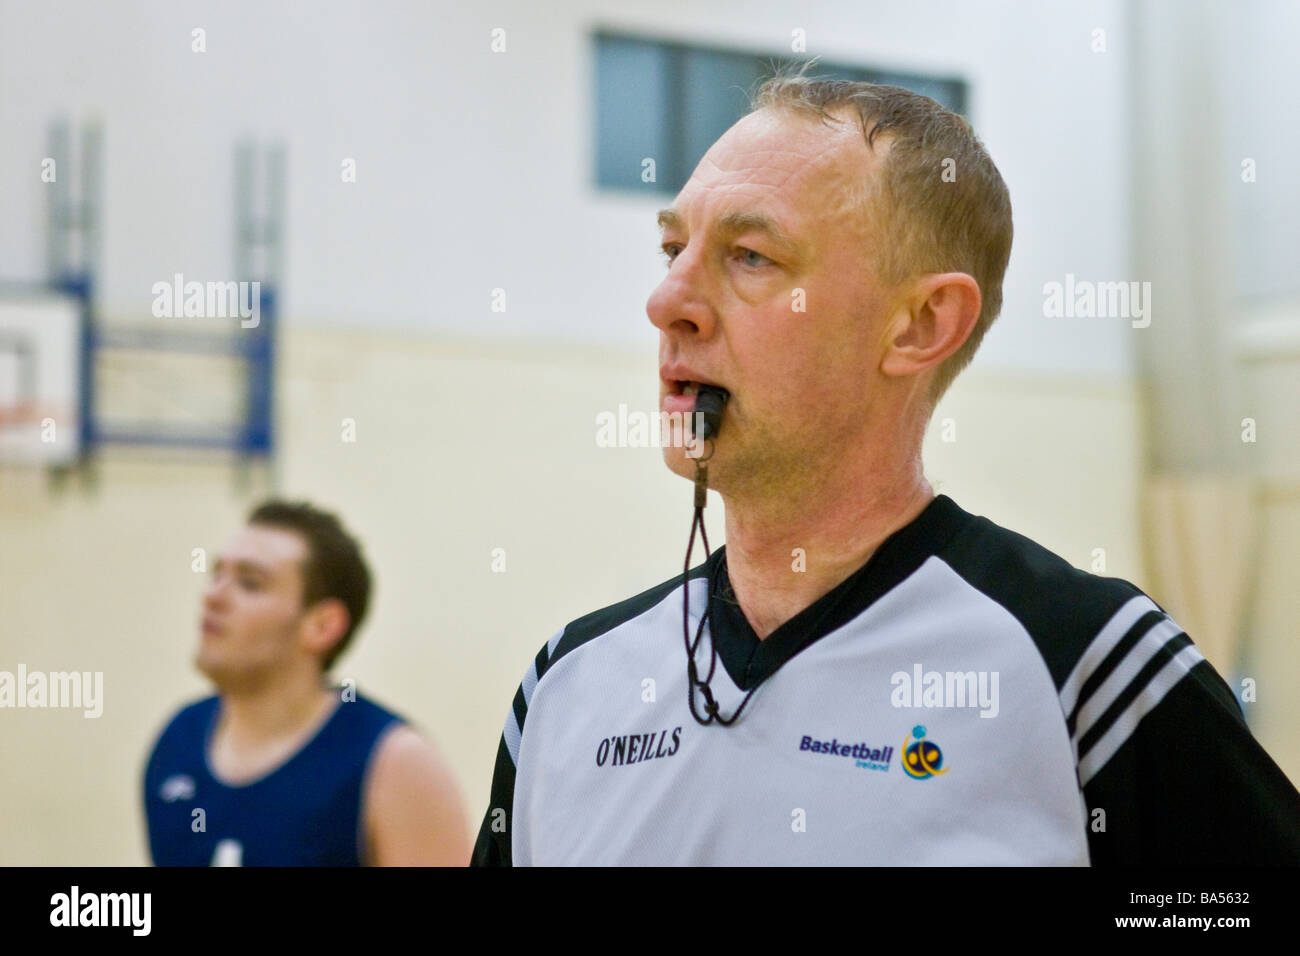 Referee with whistle at basketball match Stock Photo